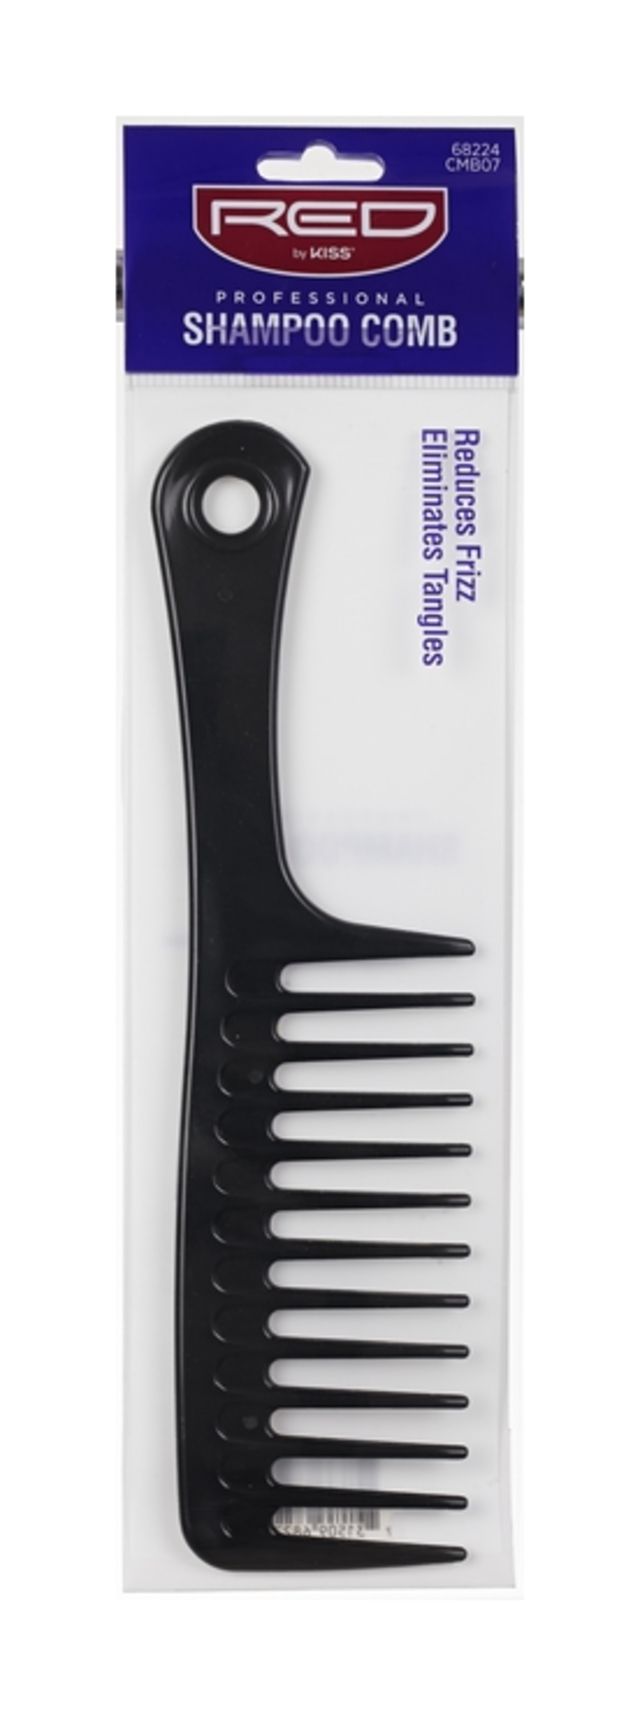 Red by Kiss Professional Shampoo Comb #HM36(CMB07)